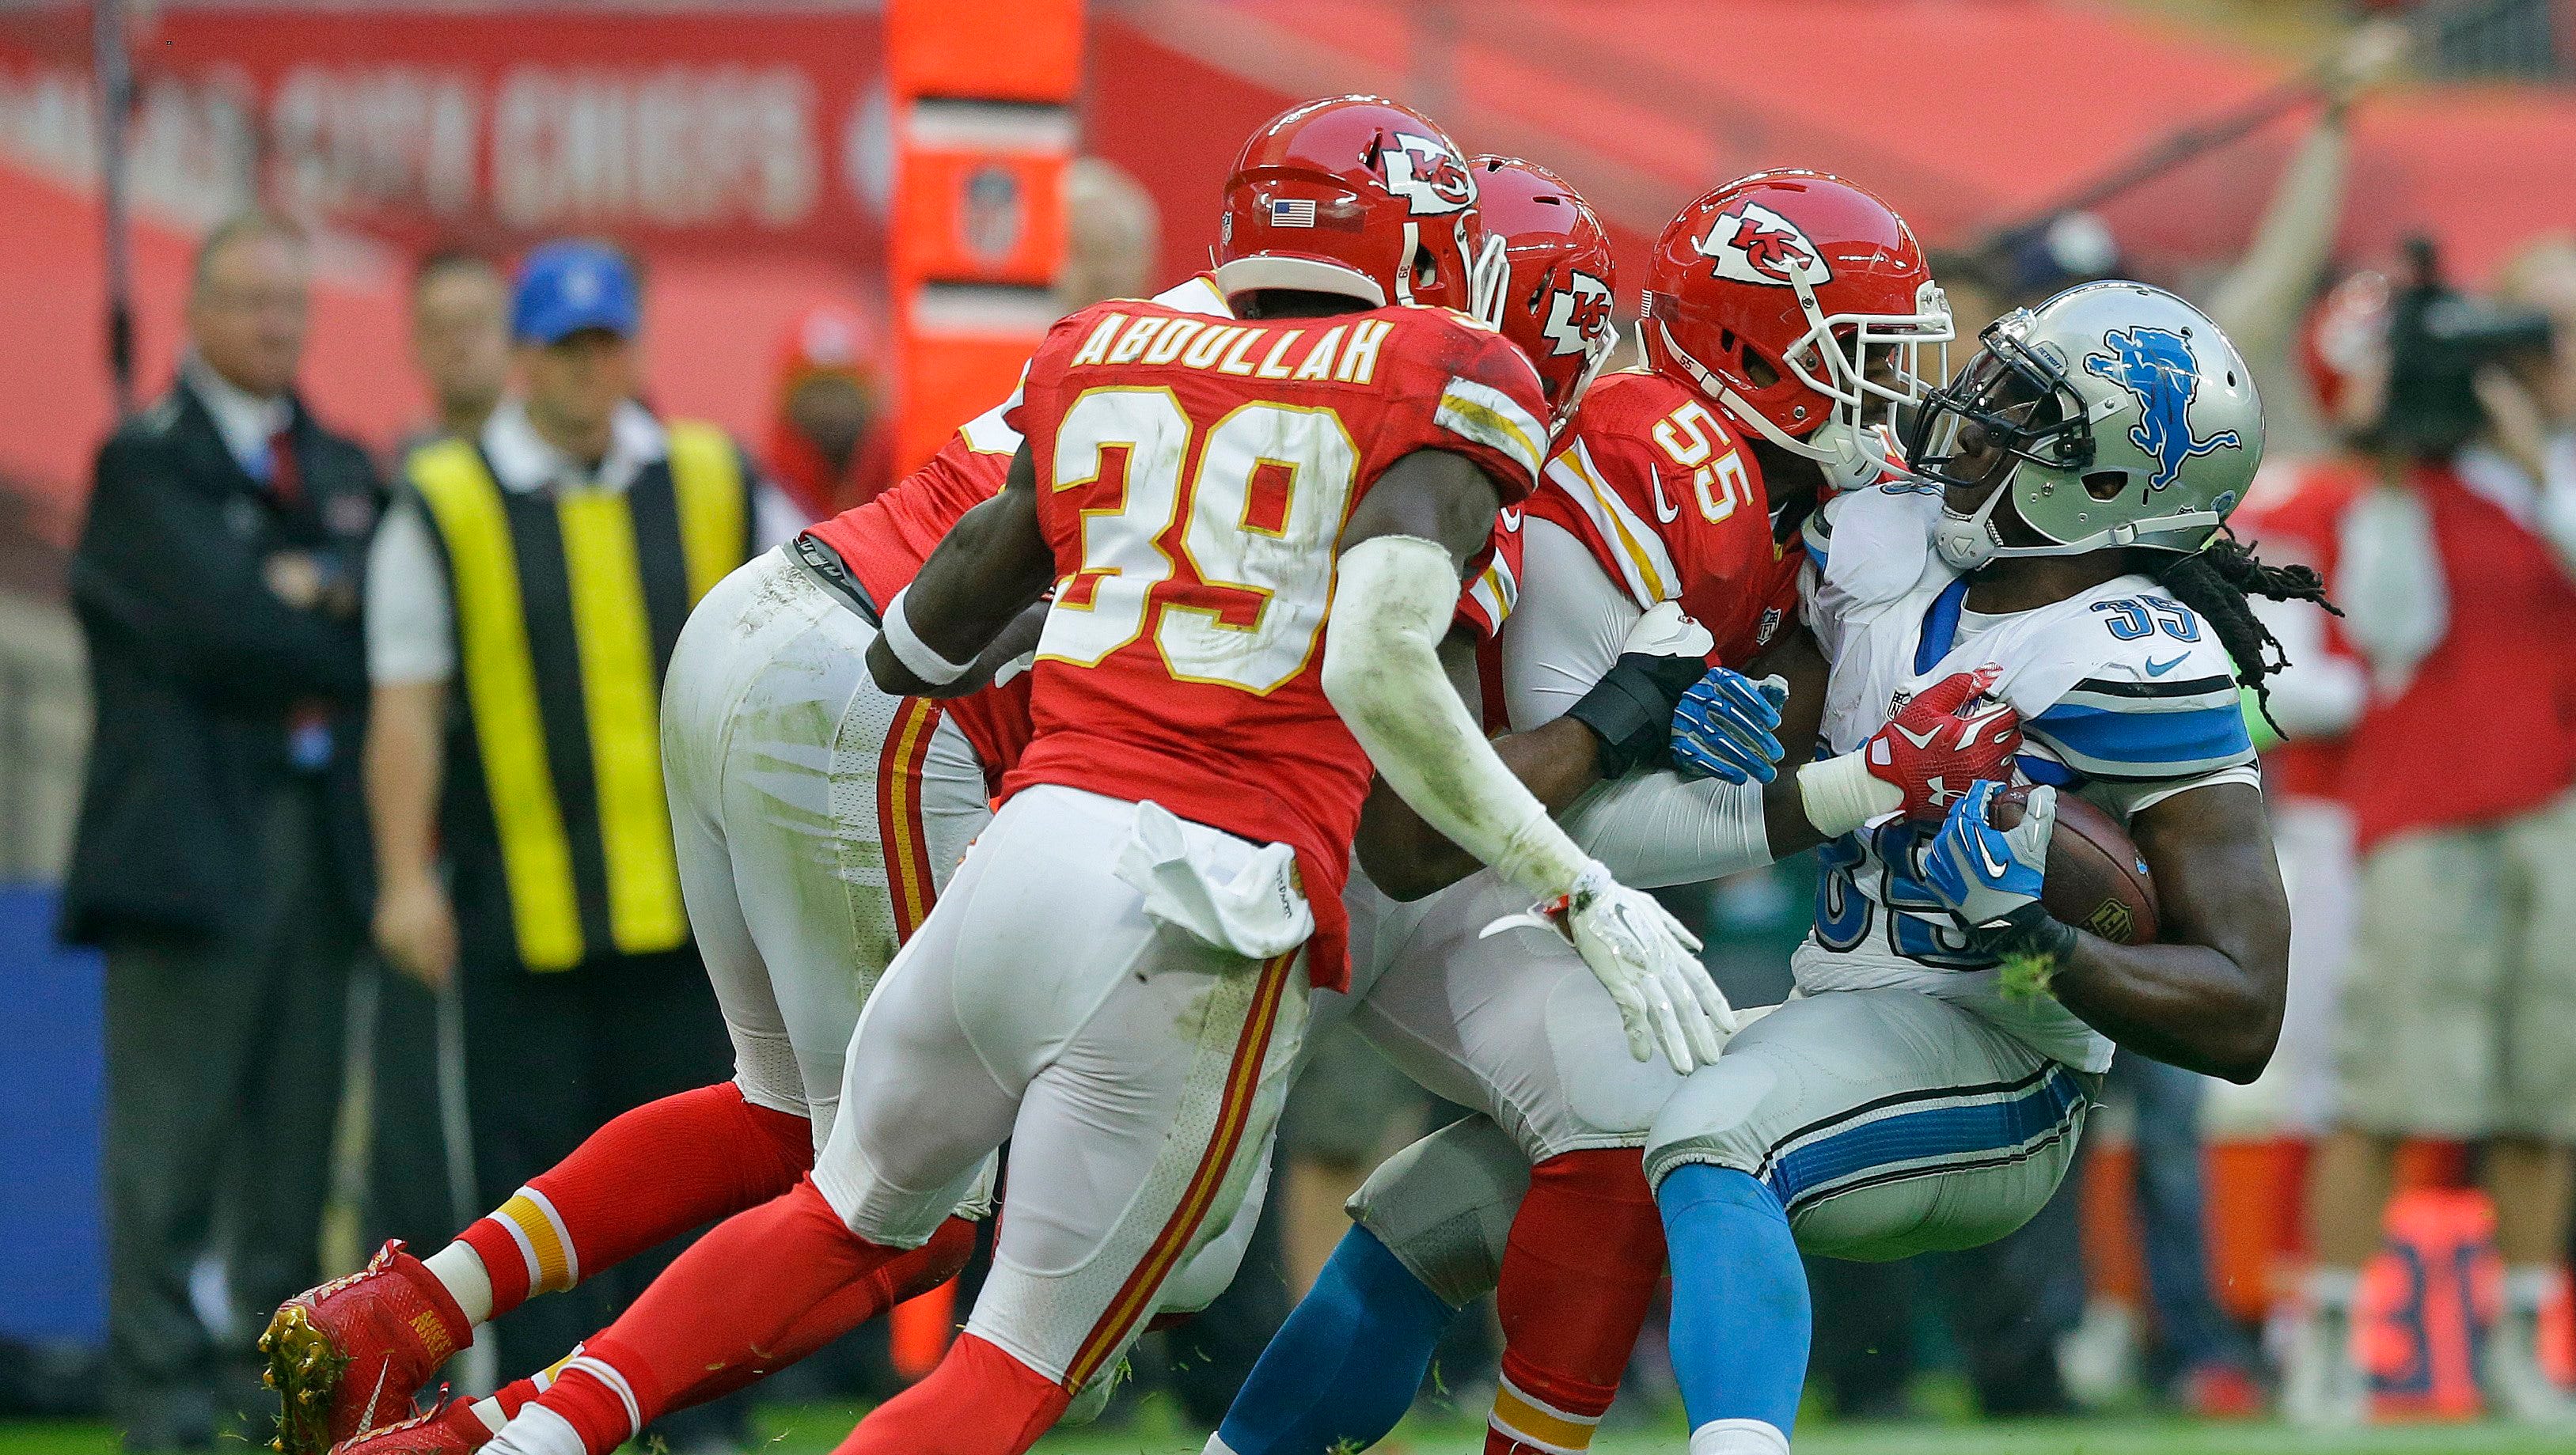 The Lions were dominated in their last outing, a 45-10 loss to the Chiefs on Sunday.